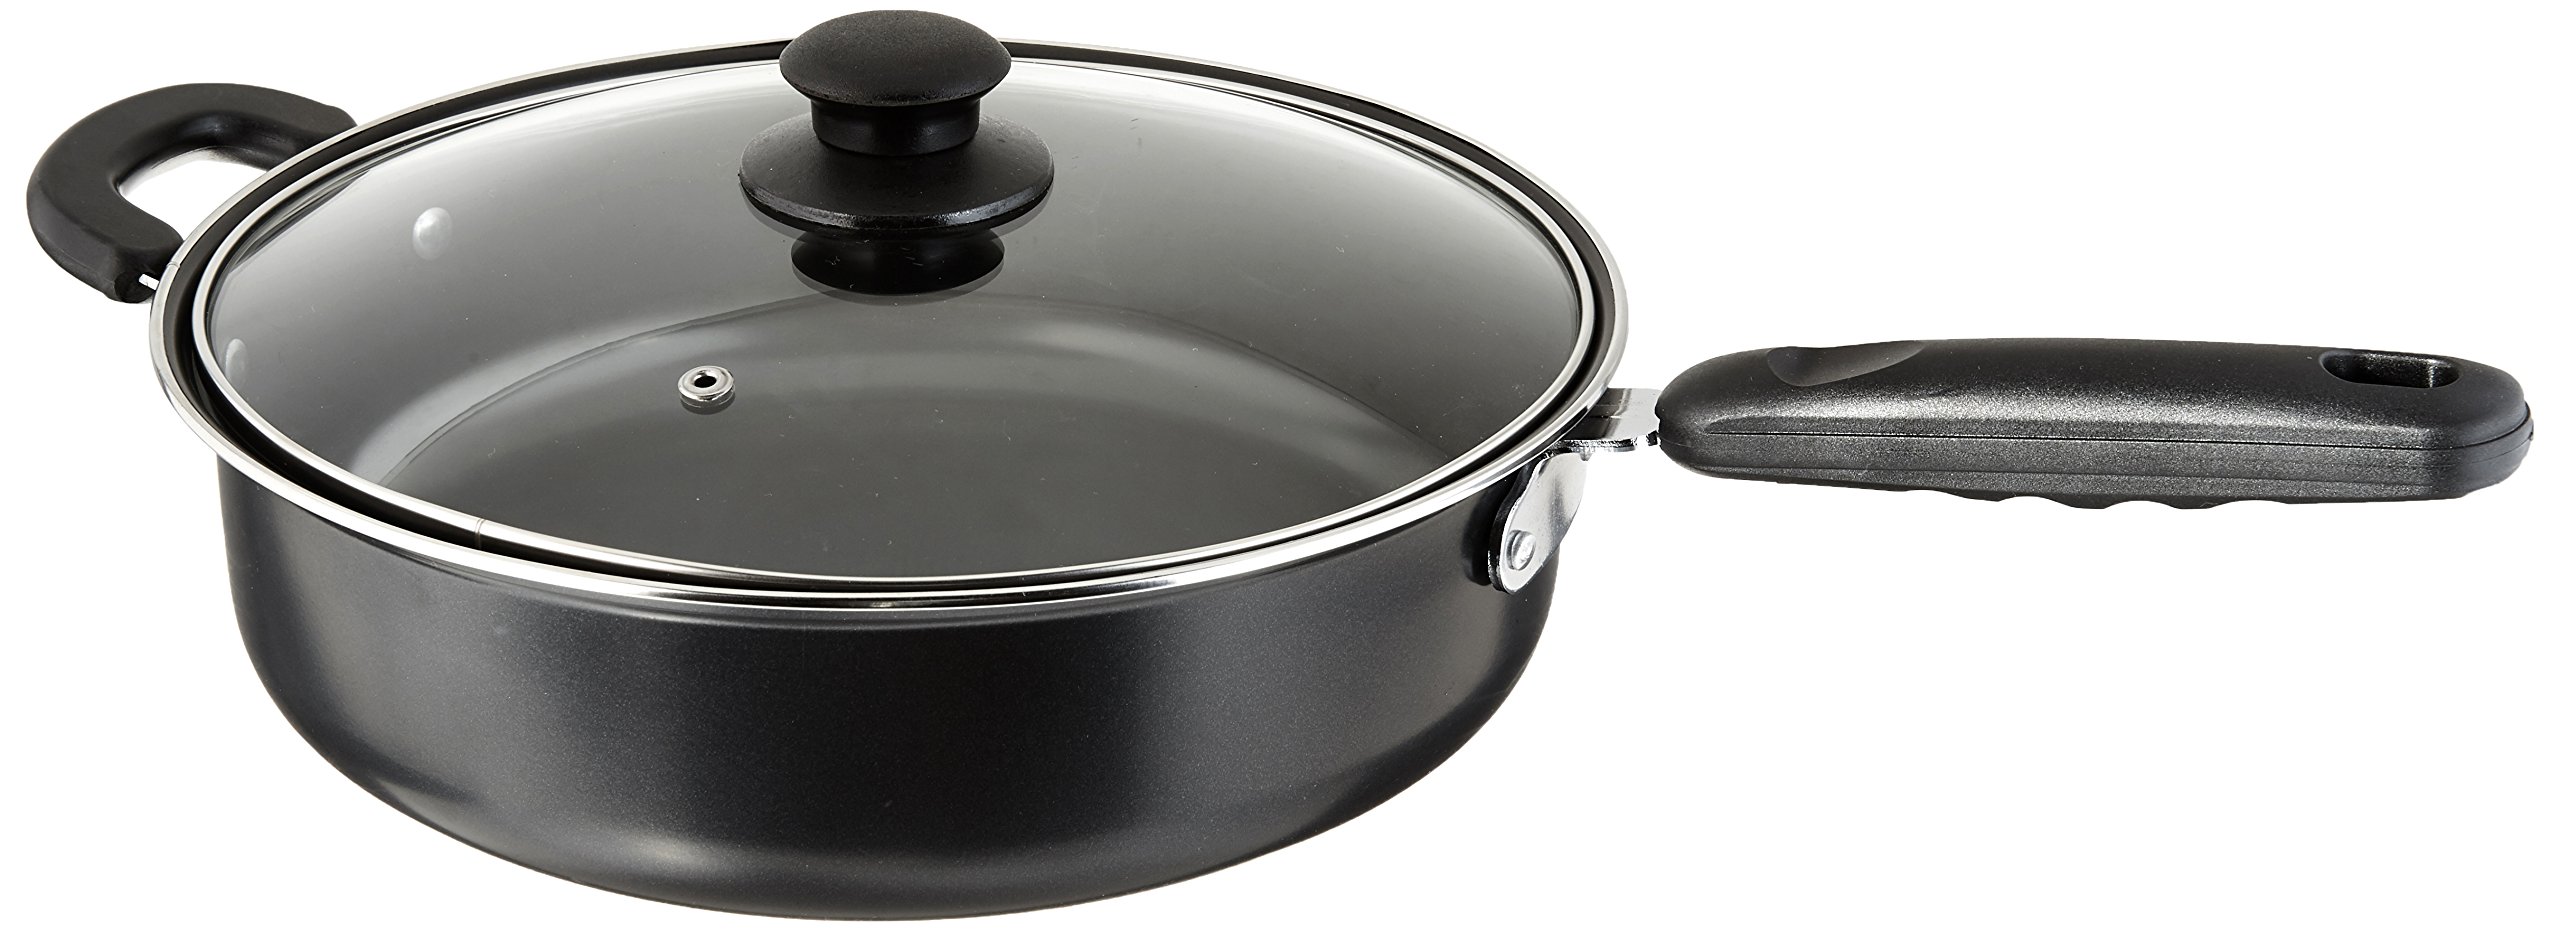 Imperial Home Carbon Steel Pan, Nonstick Frying Pan/Skillet, Non Stick Skillets, Kitchen Cookware, Cooking Pot to Fry Egg, Cook or Reheat Food, Black with Comfortable Handle and Glass Lid (11 inch)